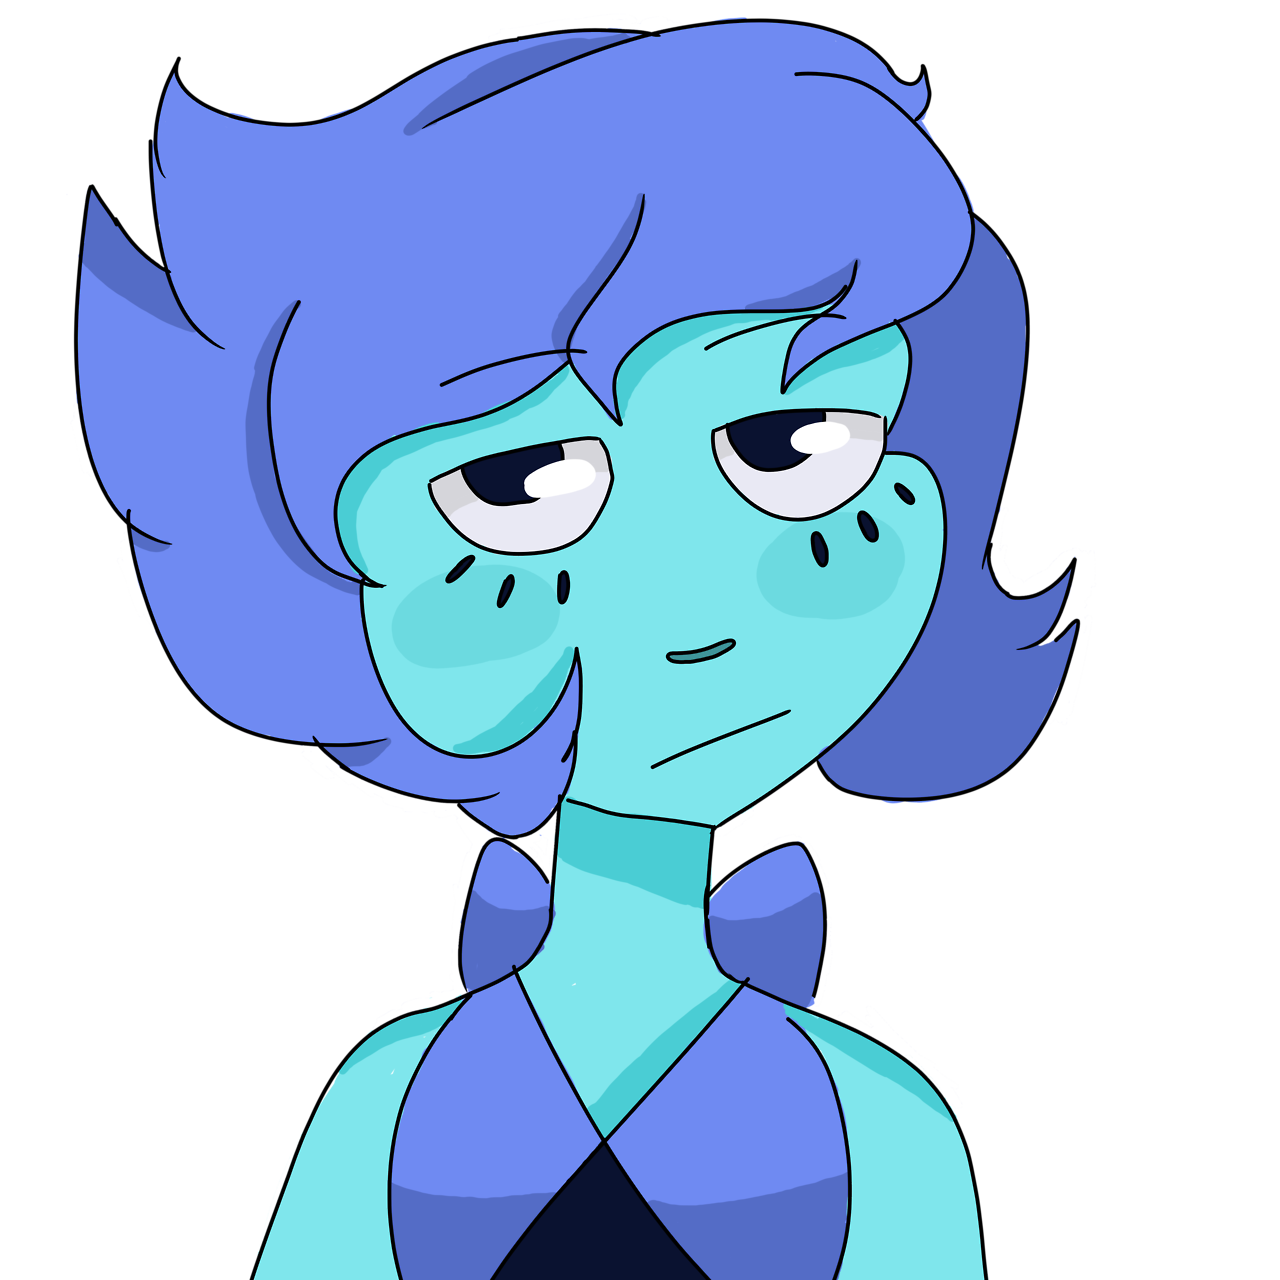 Here’s your favorite gem (P.S. It’s transparent!)